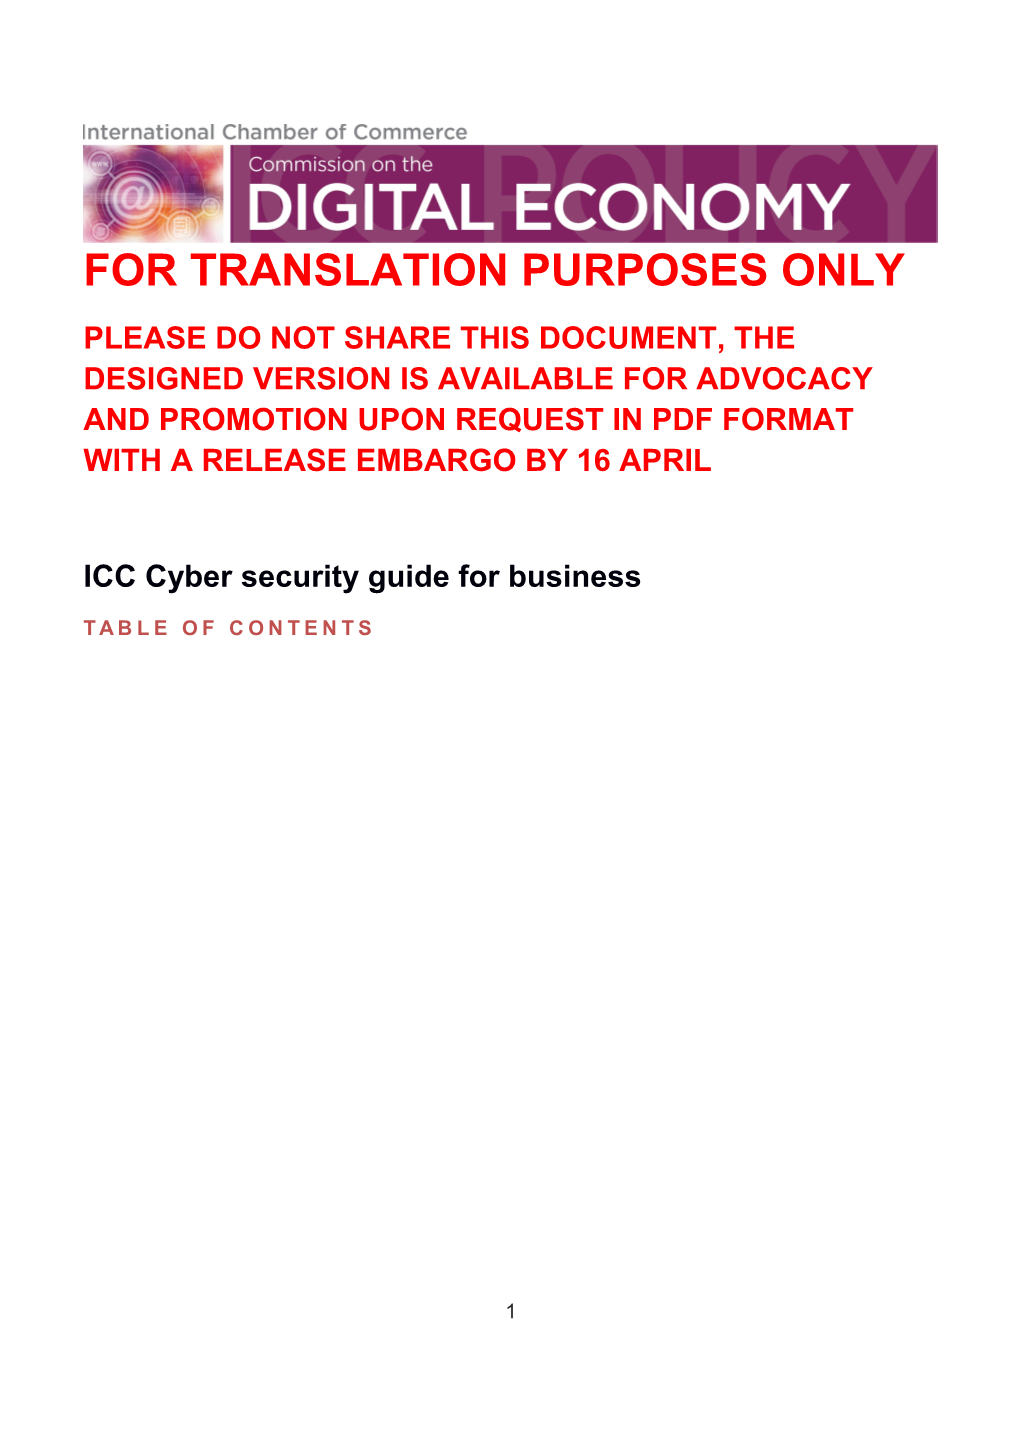 ICC Cyber Security Guide for Business